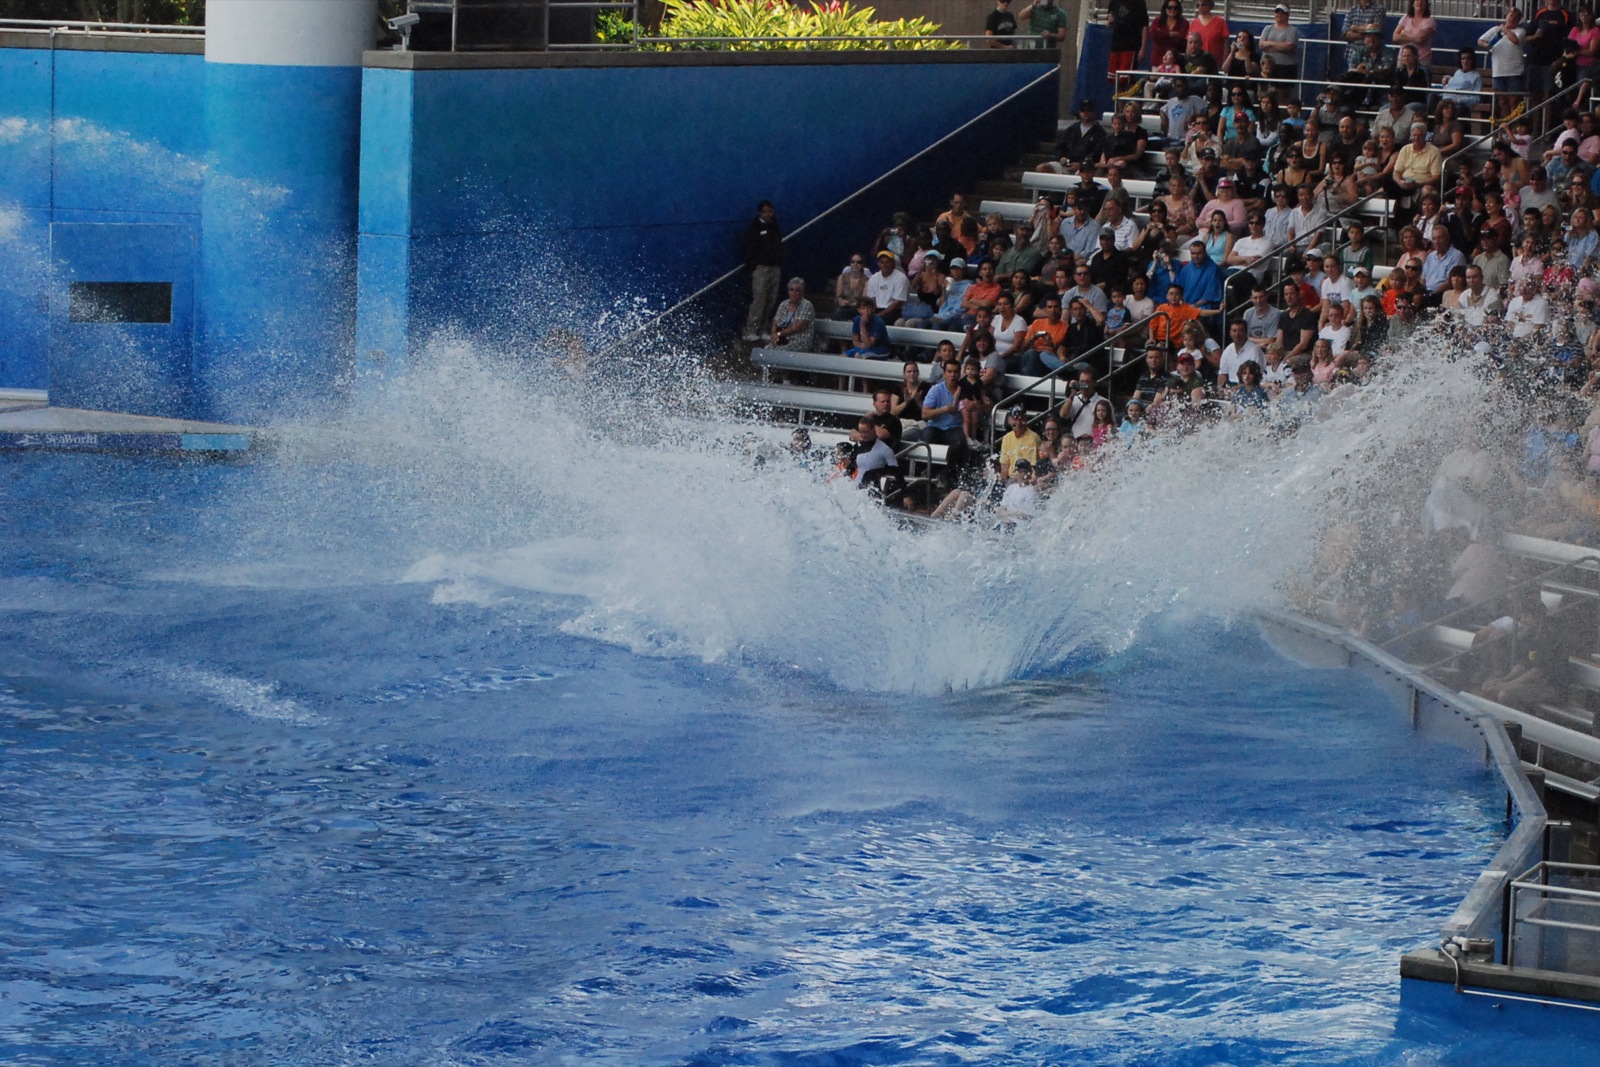 a dolphin splashing in the water during a show